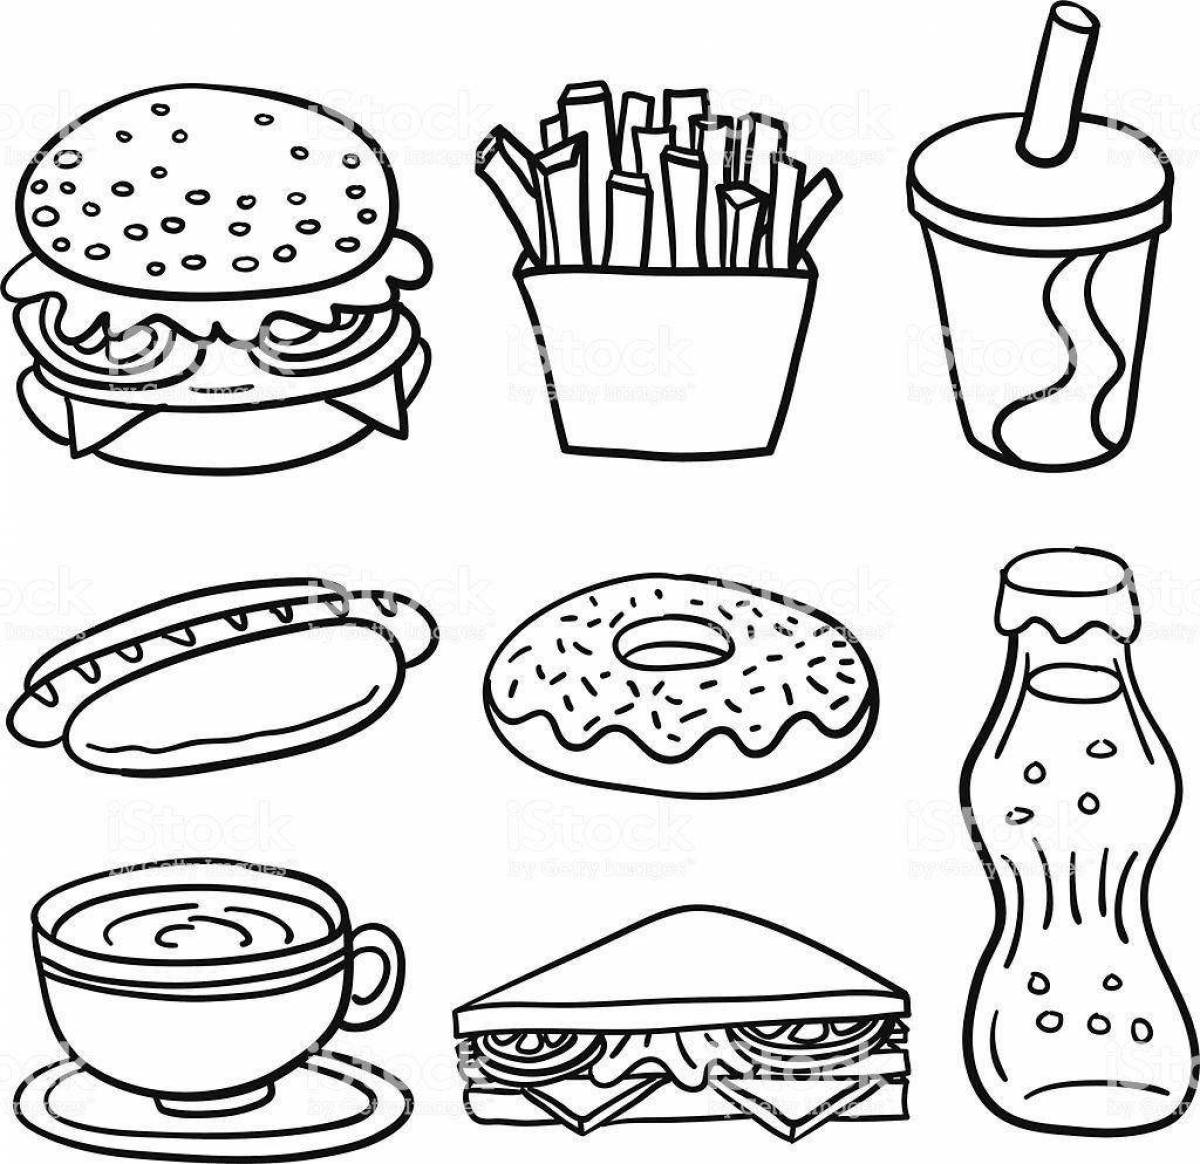 Coloring page adorable harmful foods